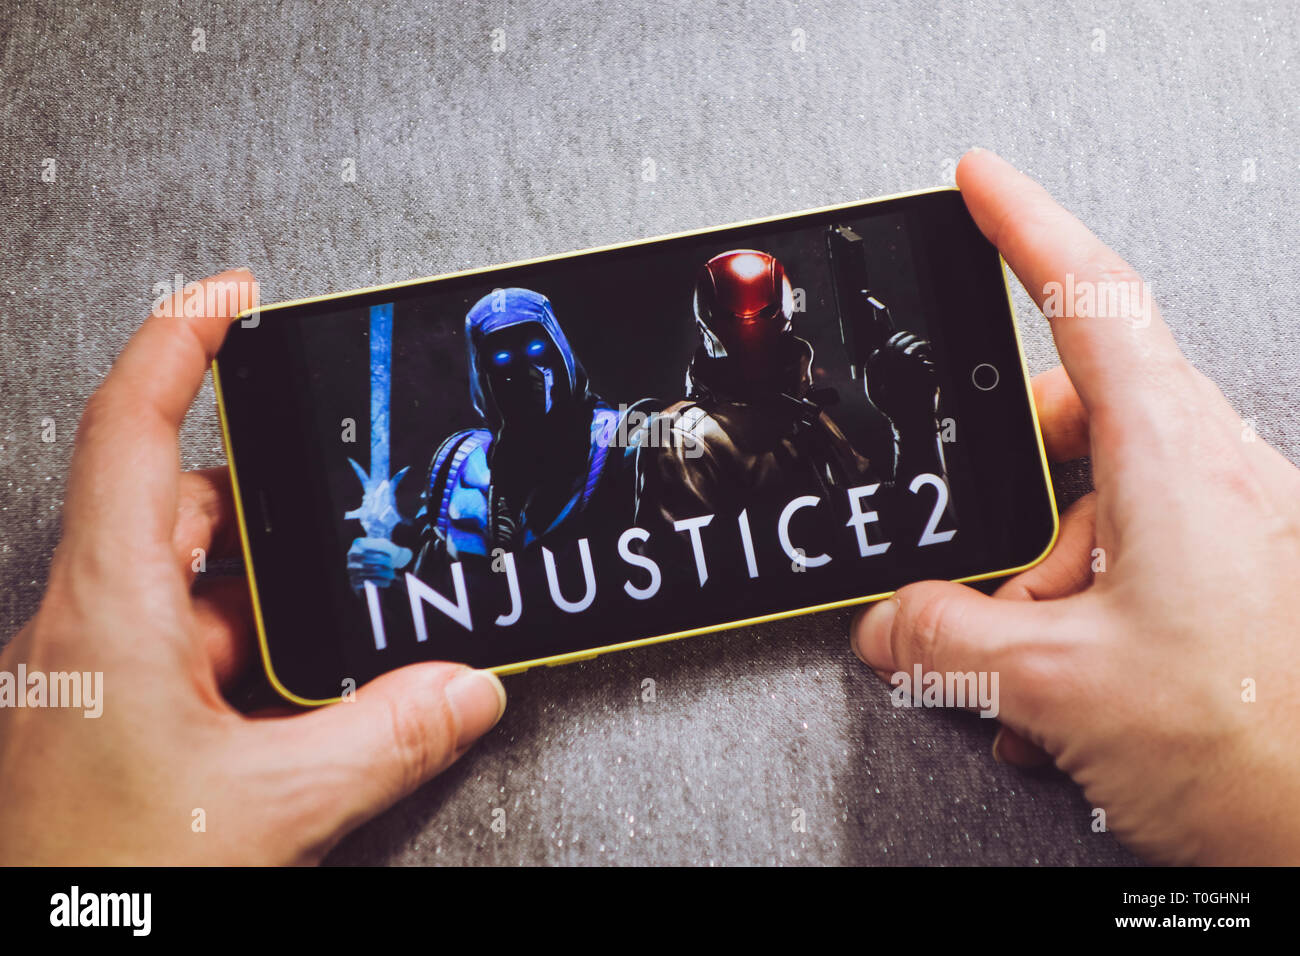 Berdyansk, Ukraine - March 4, 2019: Hands holding a smartphone with Injustice 2 game on display screen. Stock Photo